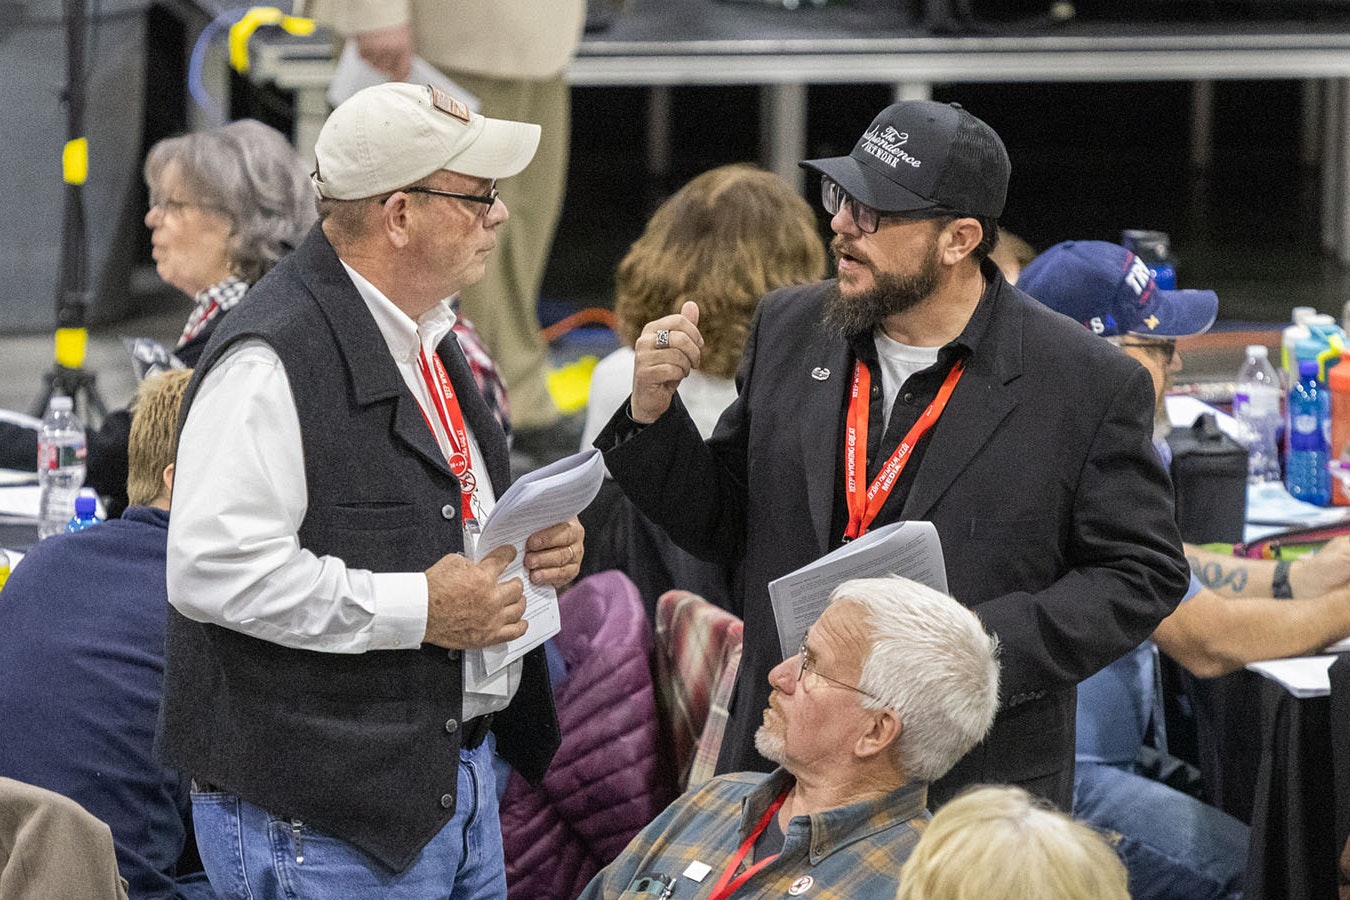 Park County delegate Vince Kanata, left, and Carbon County delegate Joey Correnti talk during the GOP state convention Saturday in Cheyenne. They came down on opposite sides of a debate about whether to allow parties to remove precinct committee members who miss too many meetings. Vanata supported the measure, which passed, while Correnti opposed it.